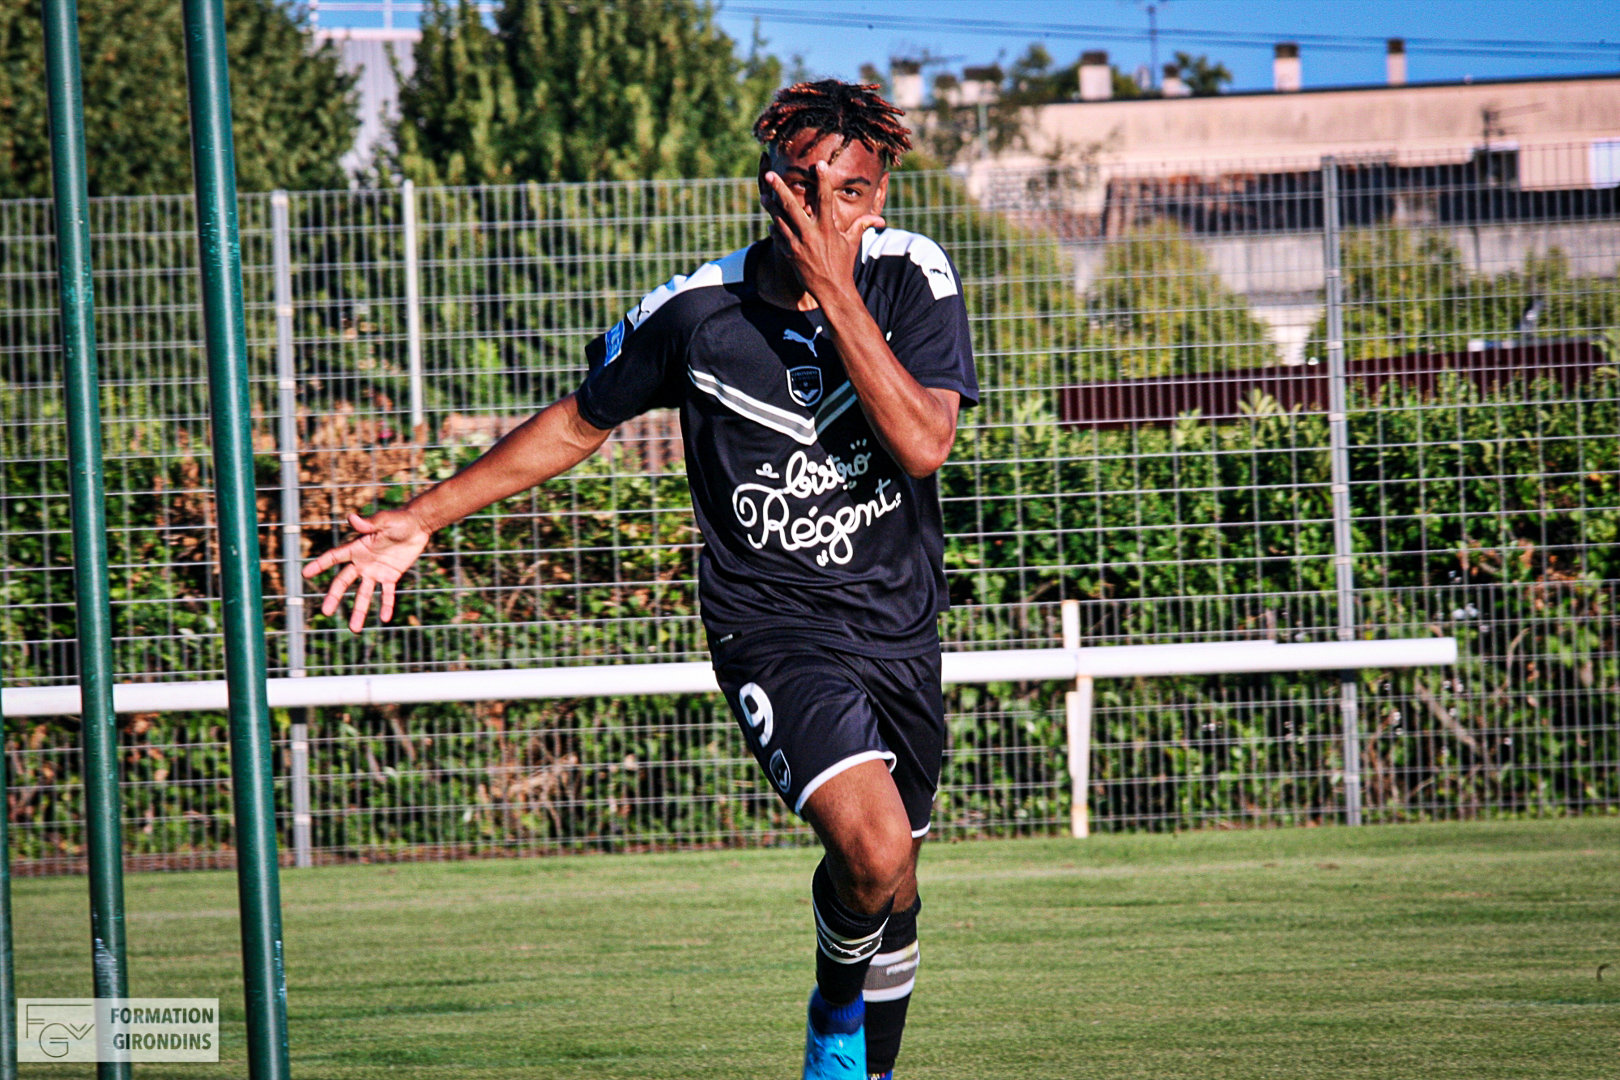 Cfa Girondins : Large victoire à Châtellerault - Formation Girondins 